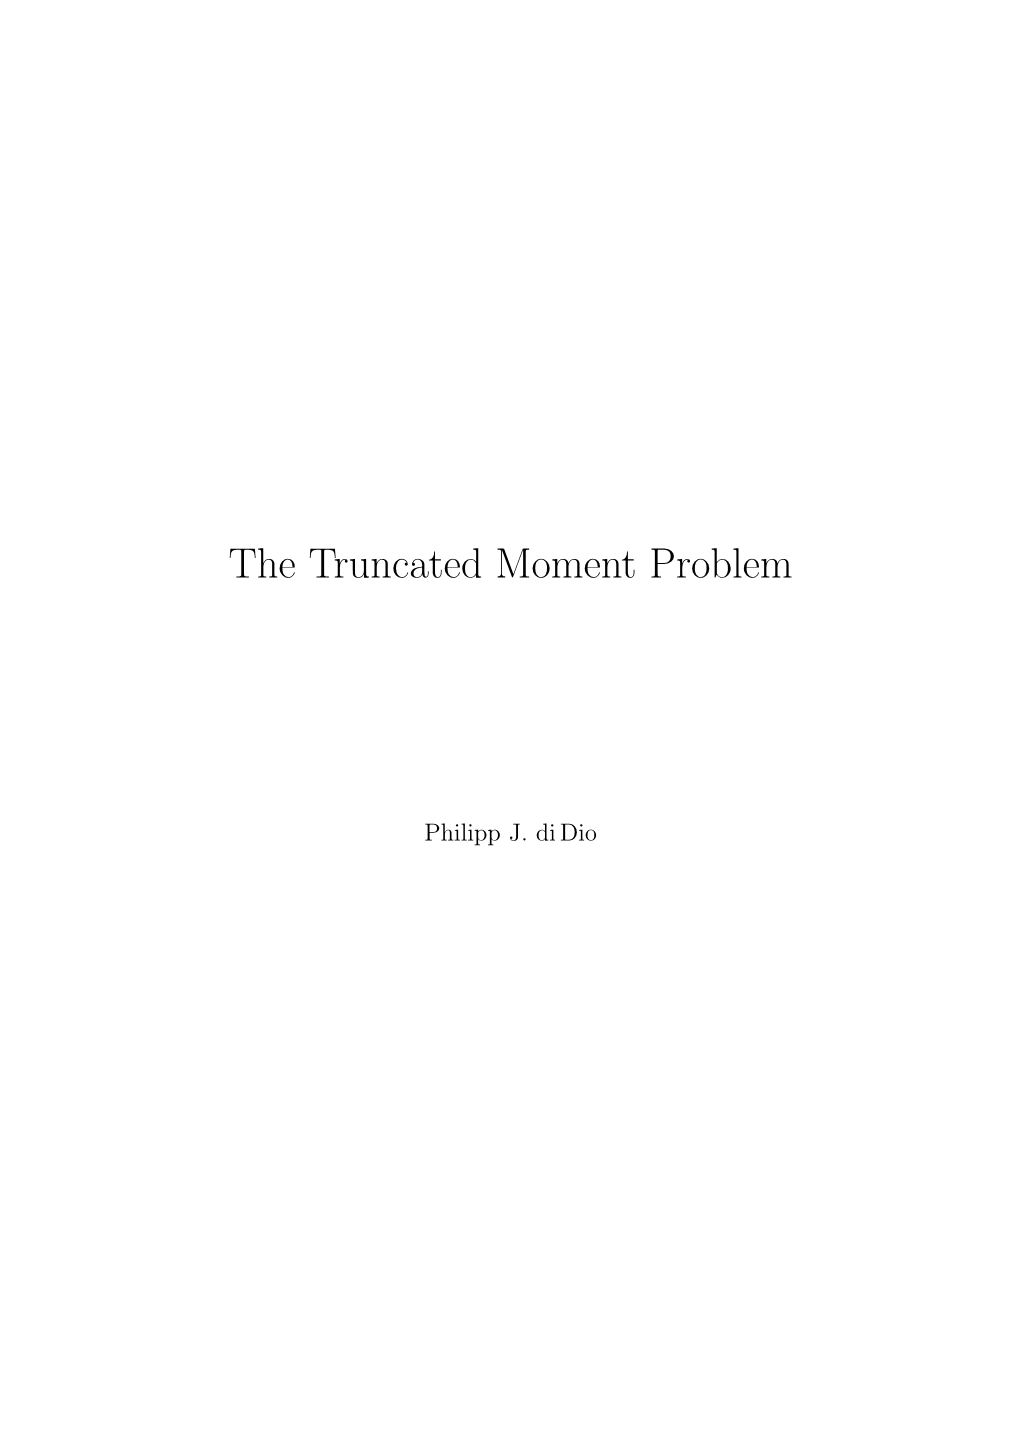 The Truncated Moment Problem